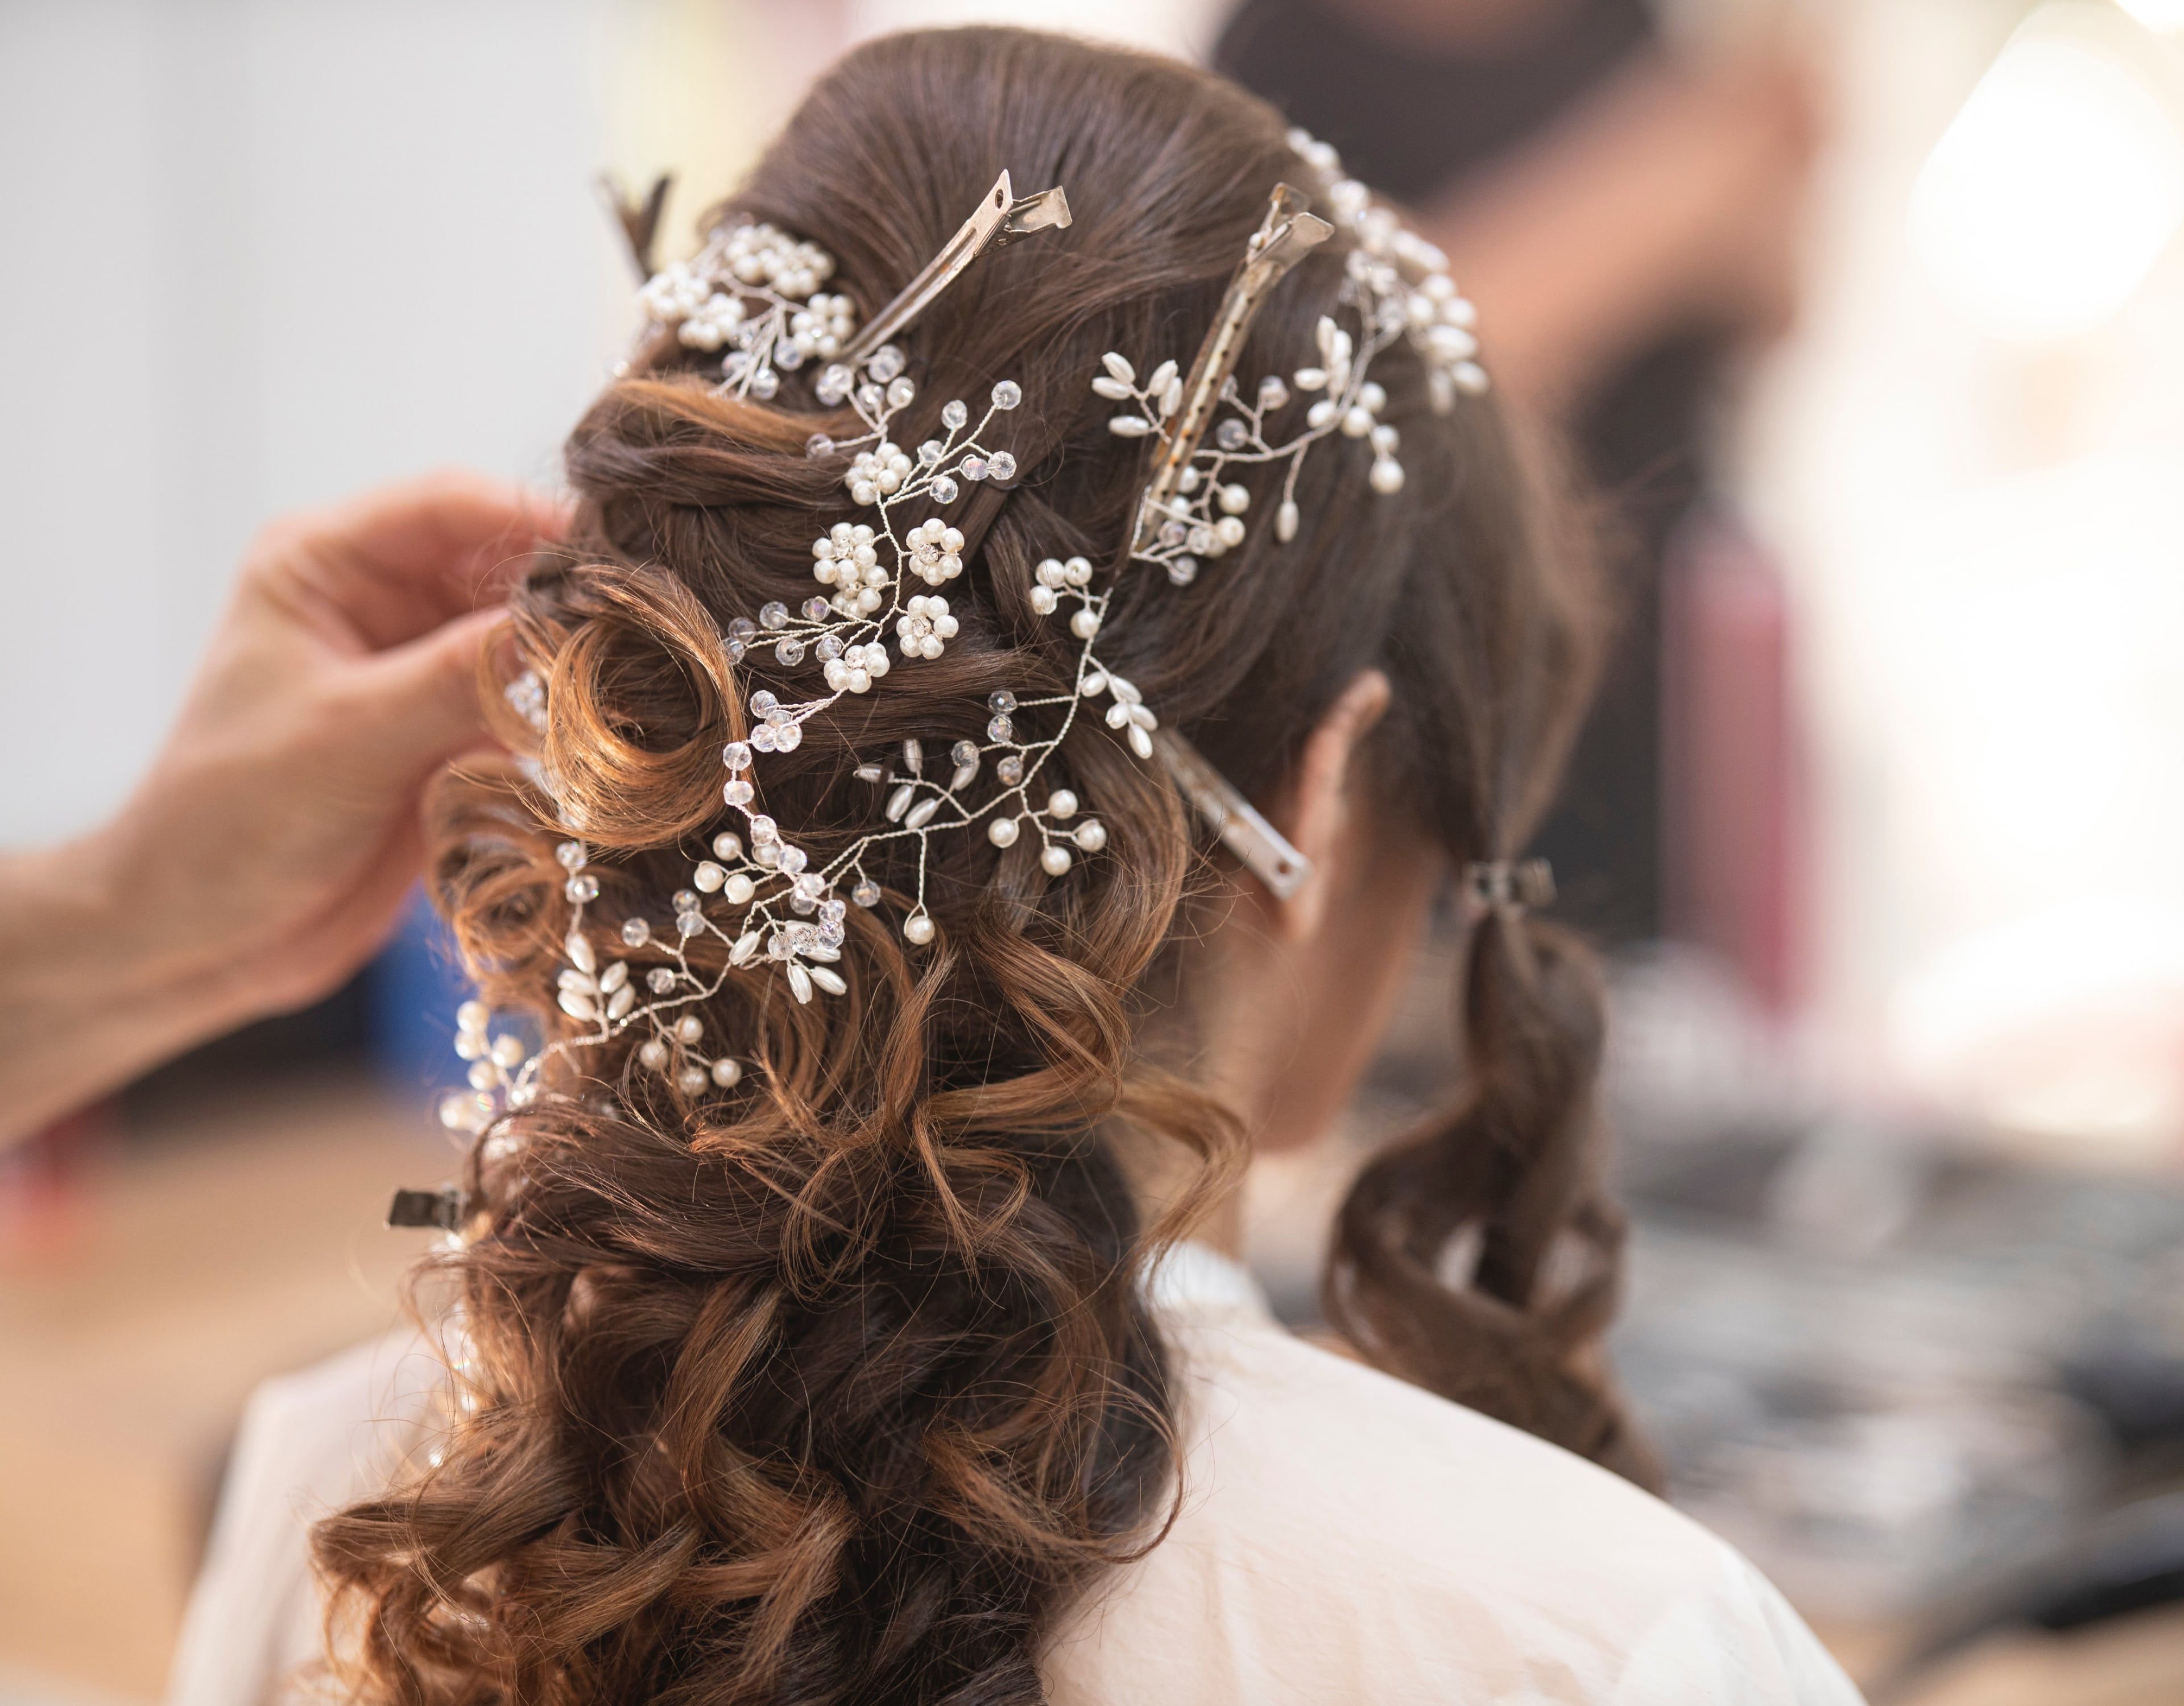 Bride having her hair done before the wedding